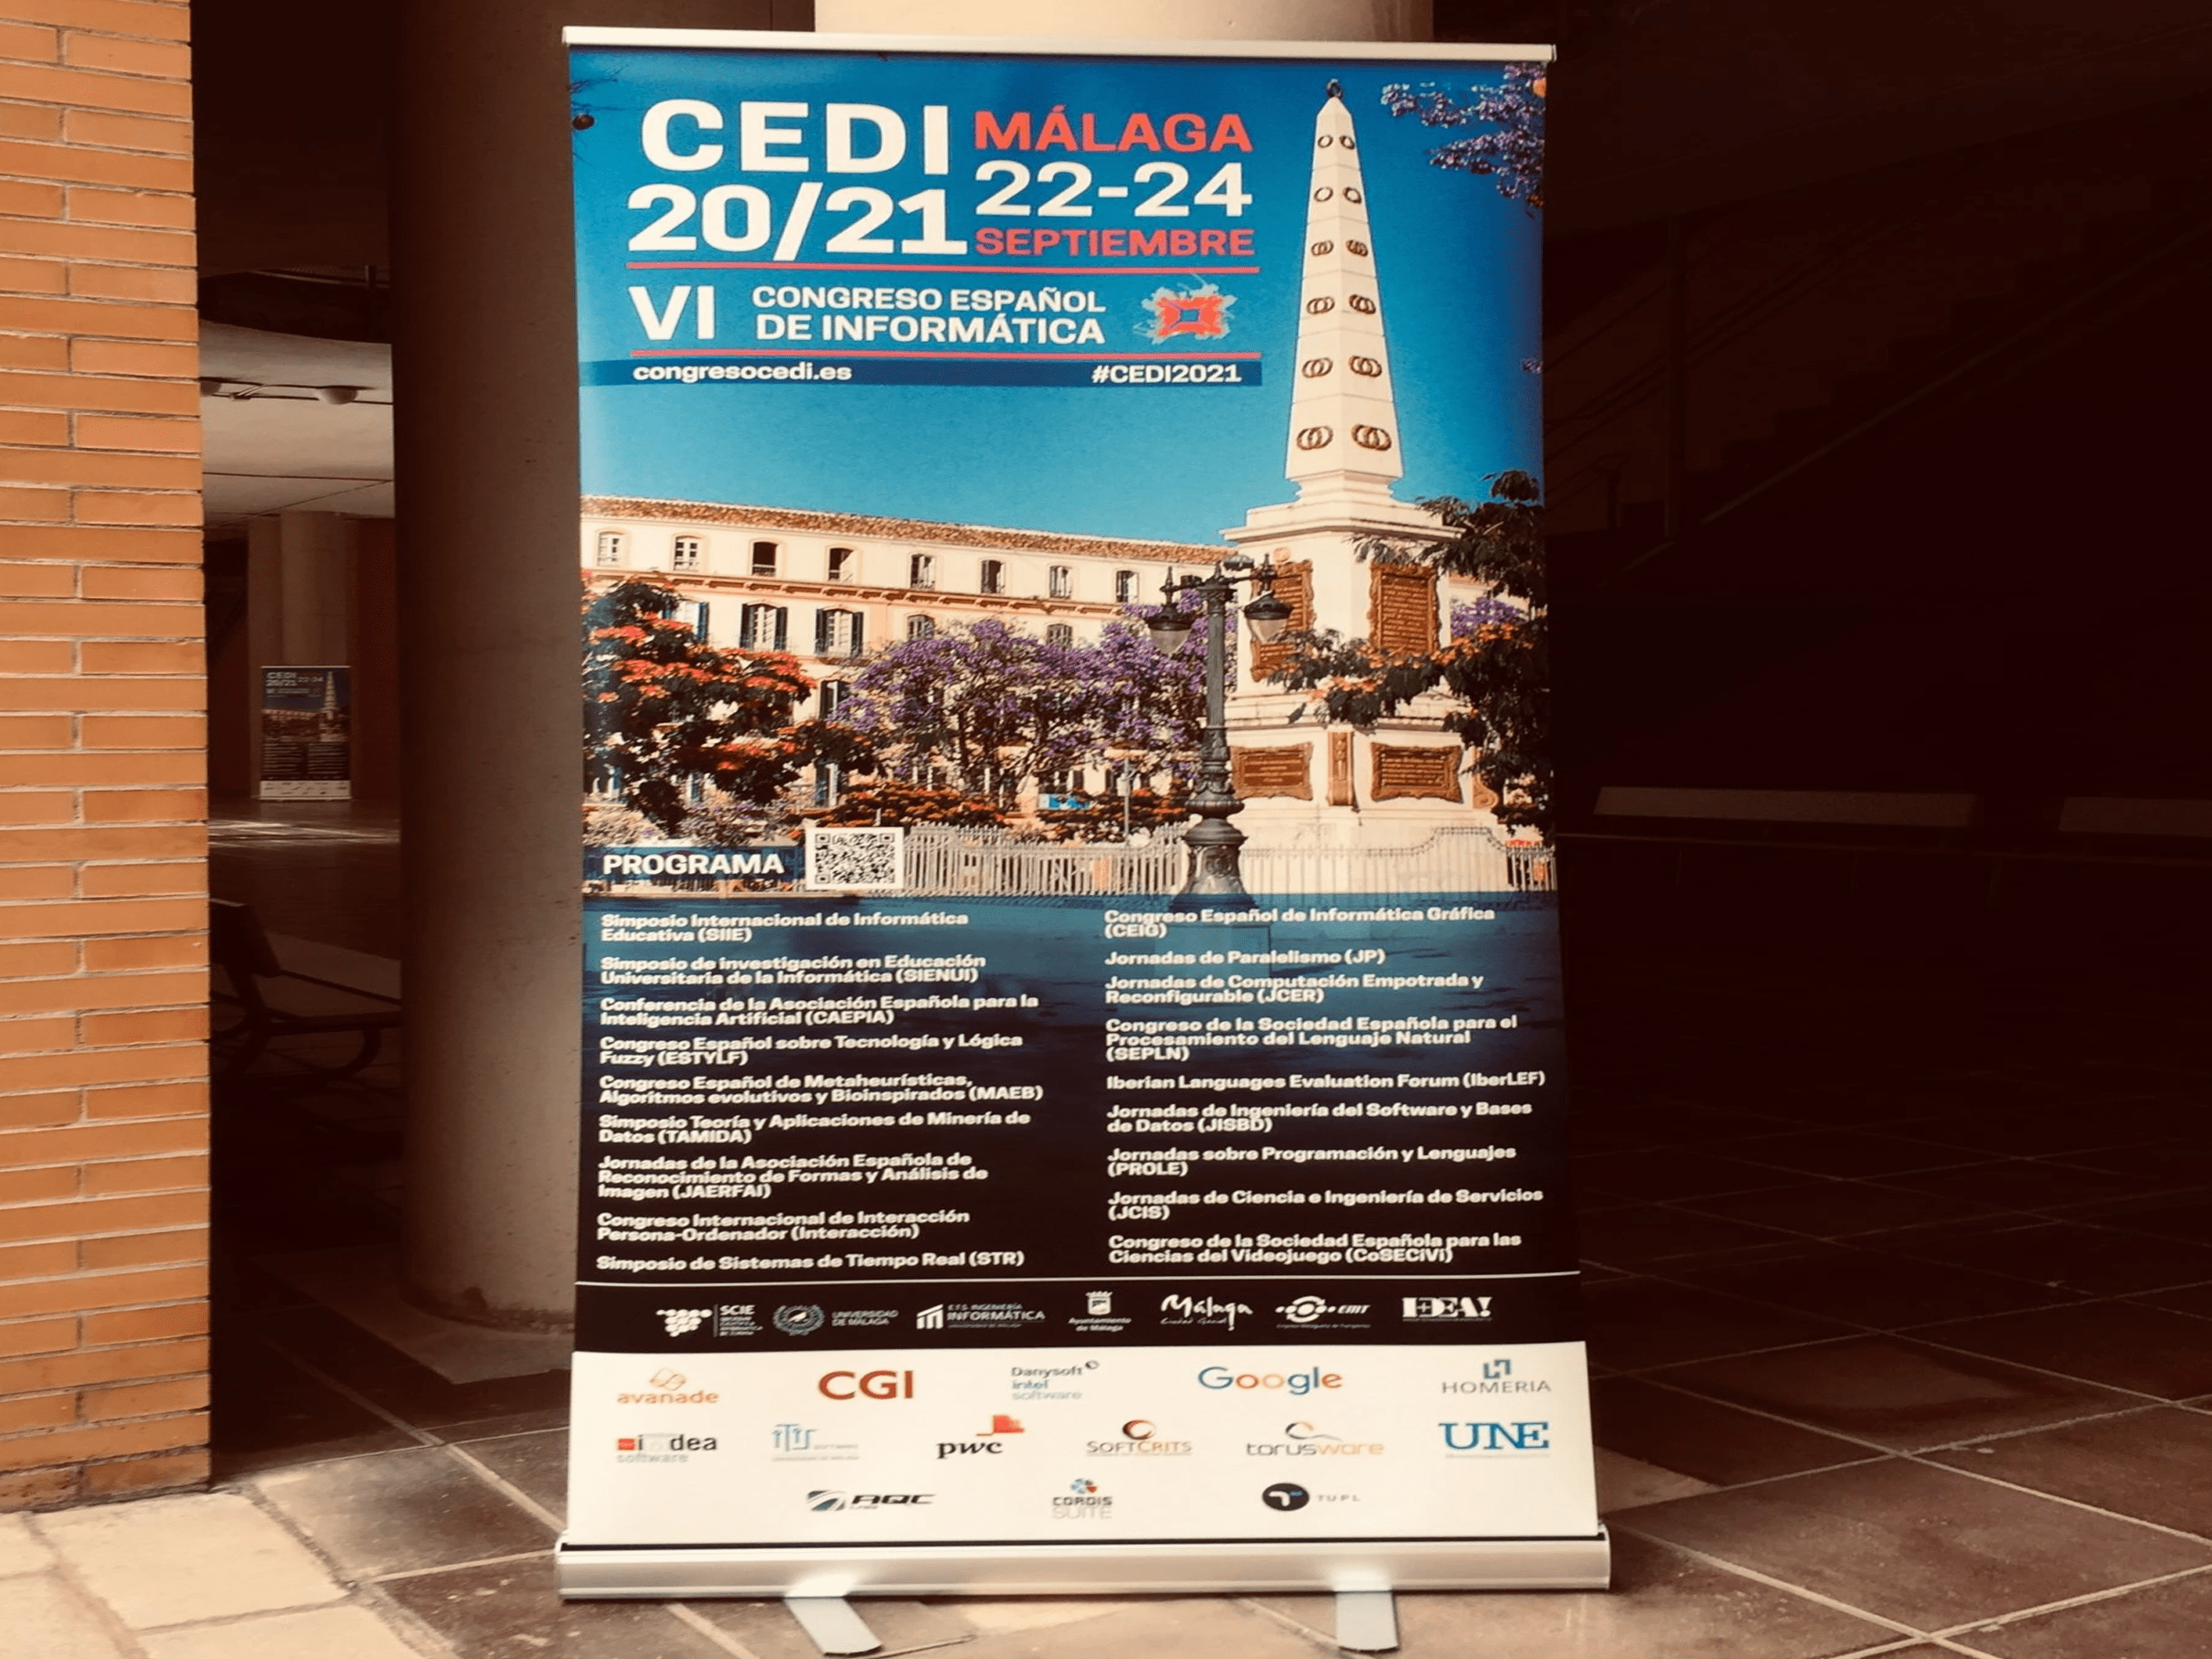 ITIS members participate in CEDI 2021, a congress that brings together computer professionals